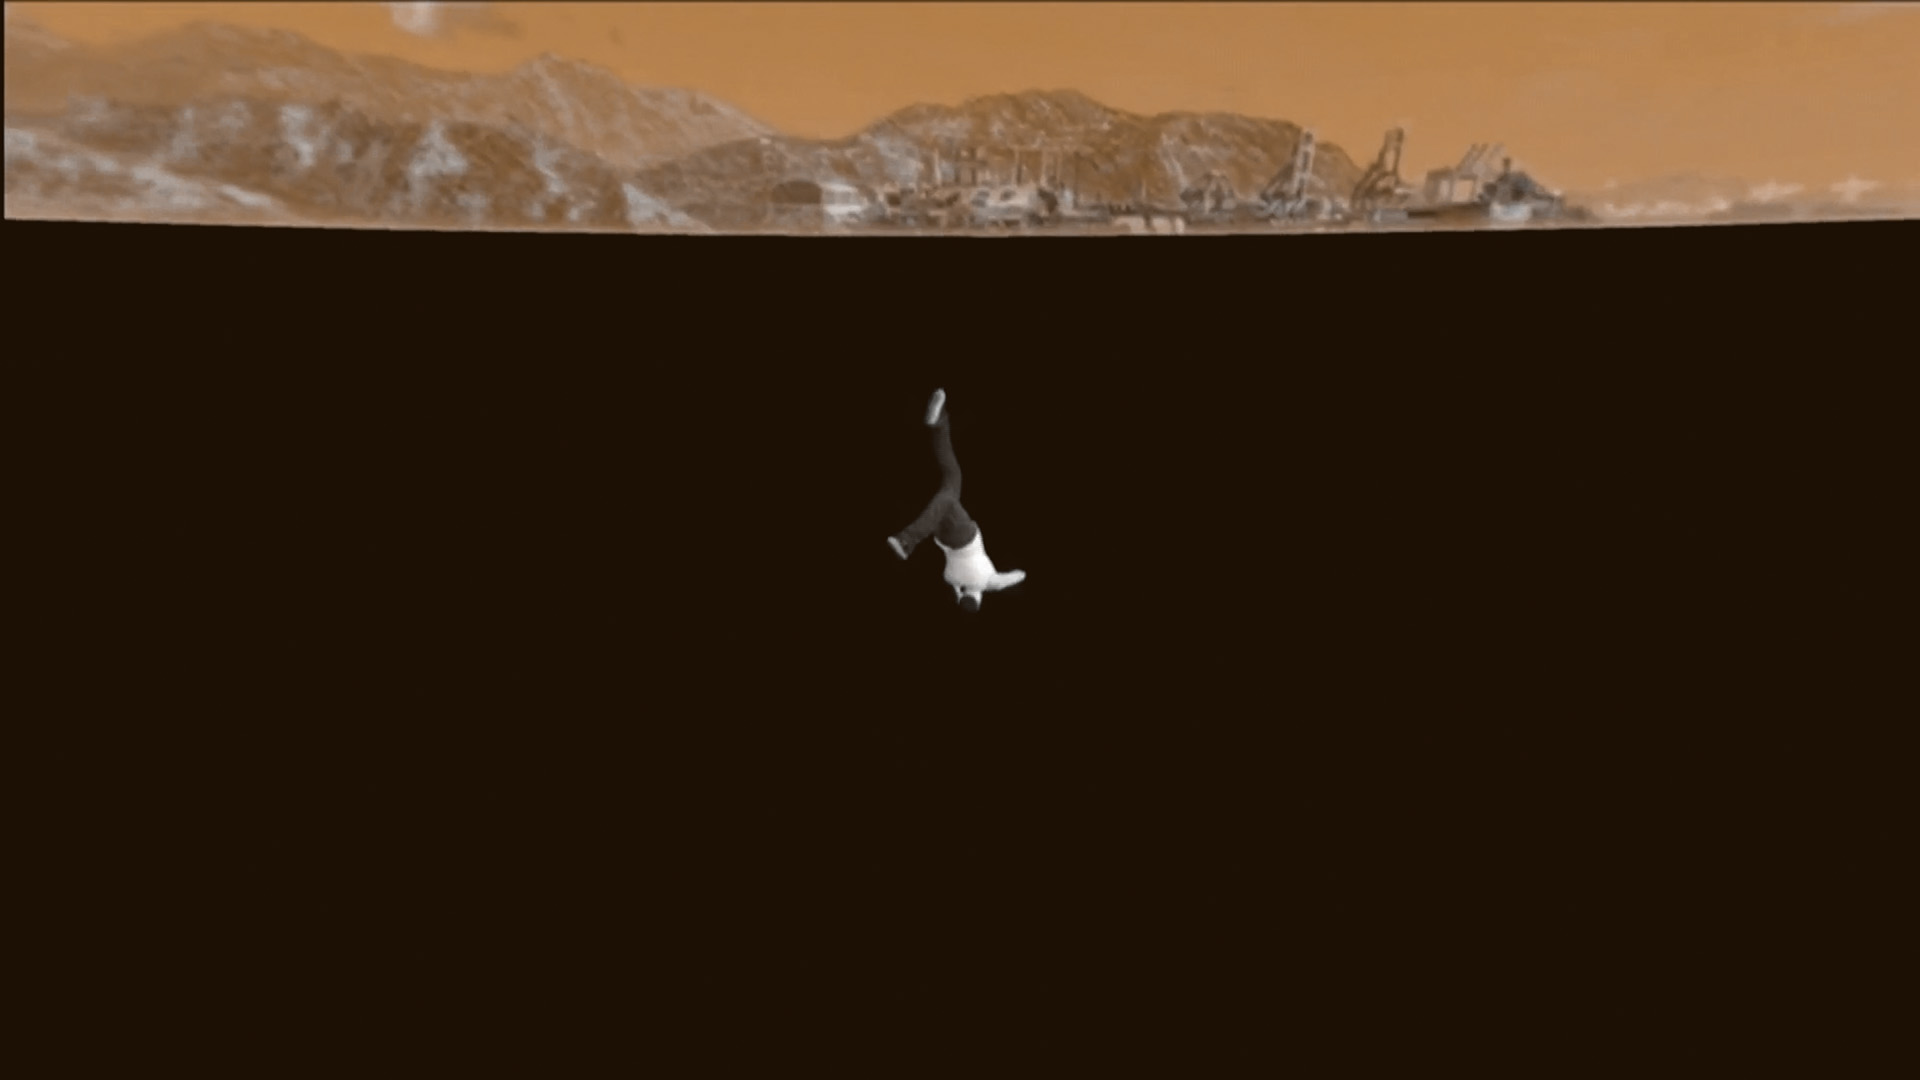 Majority black screen with a small person falling. The top of the image is a sepia sky with hills